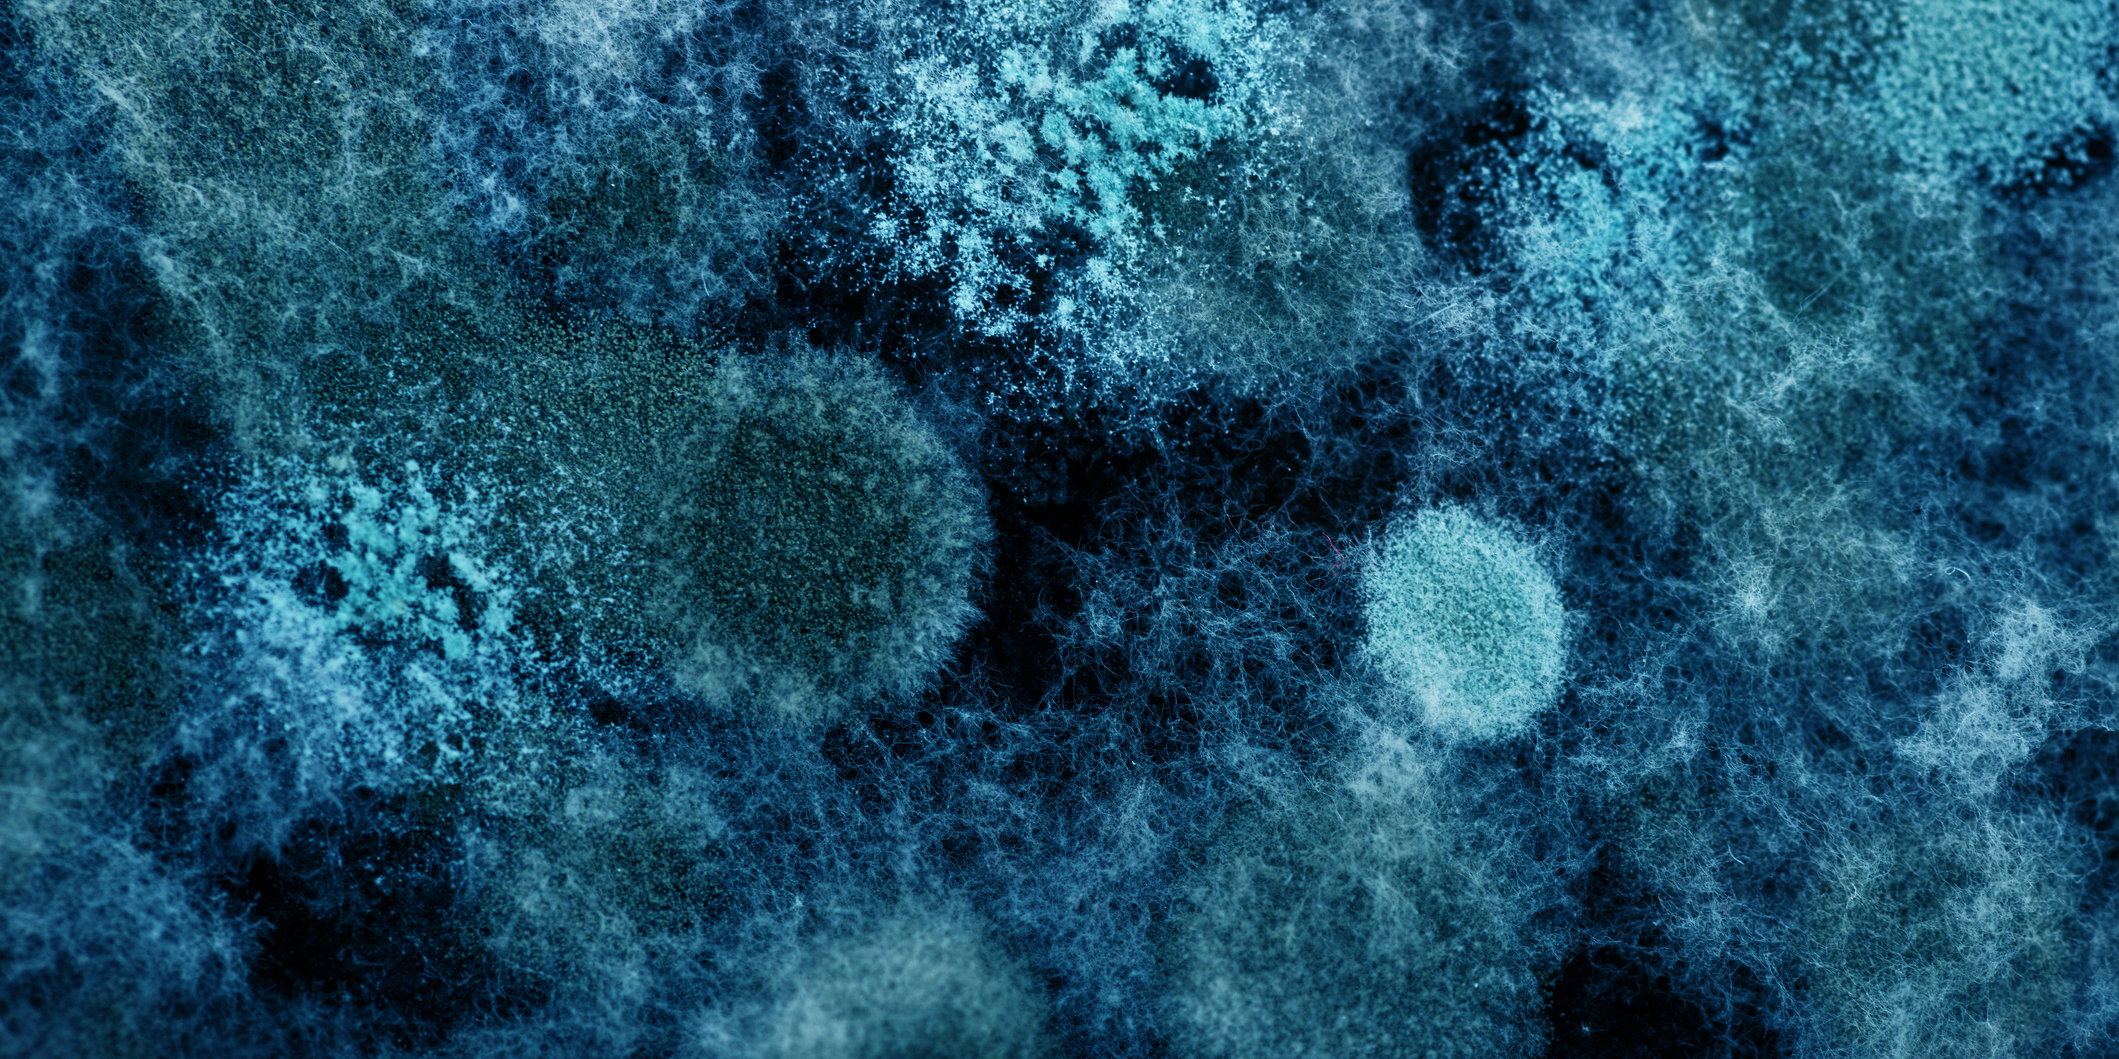 Close up image of viruses and bacteria